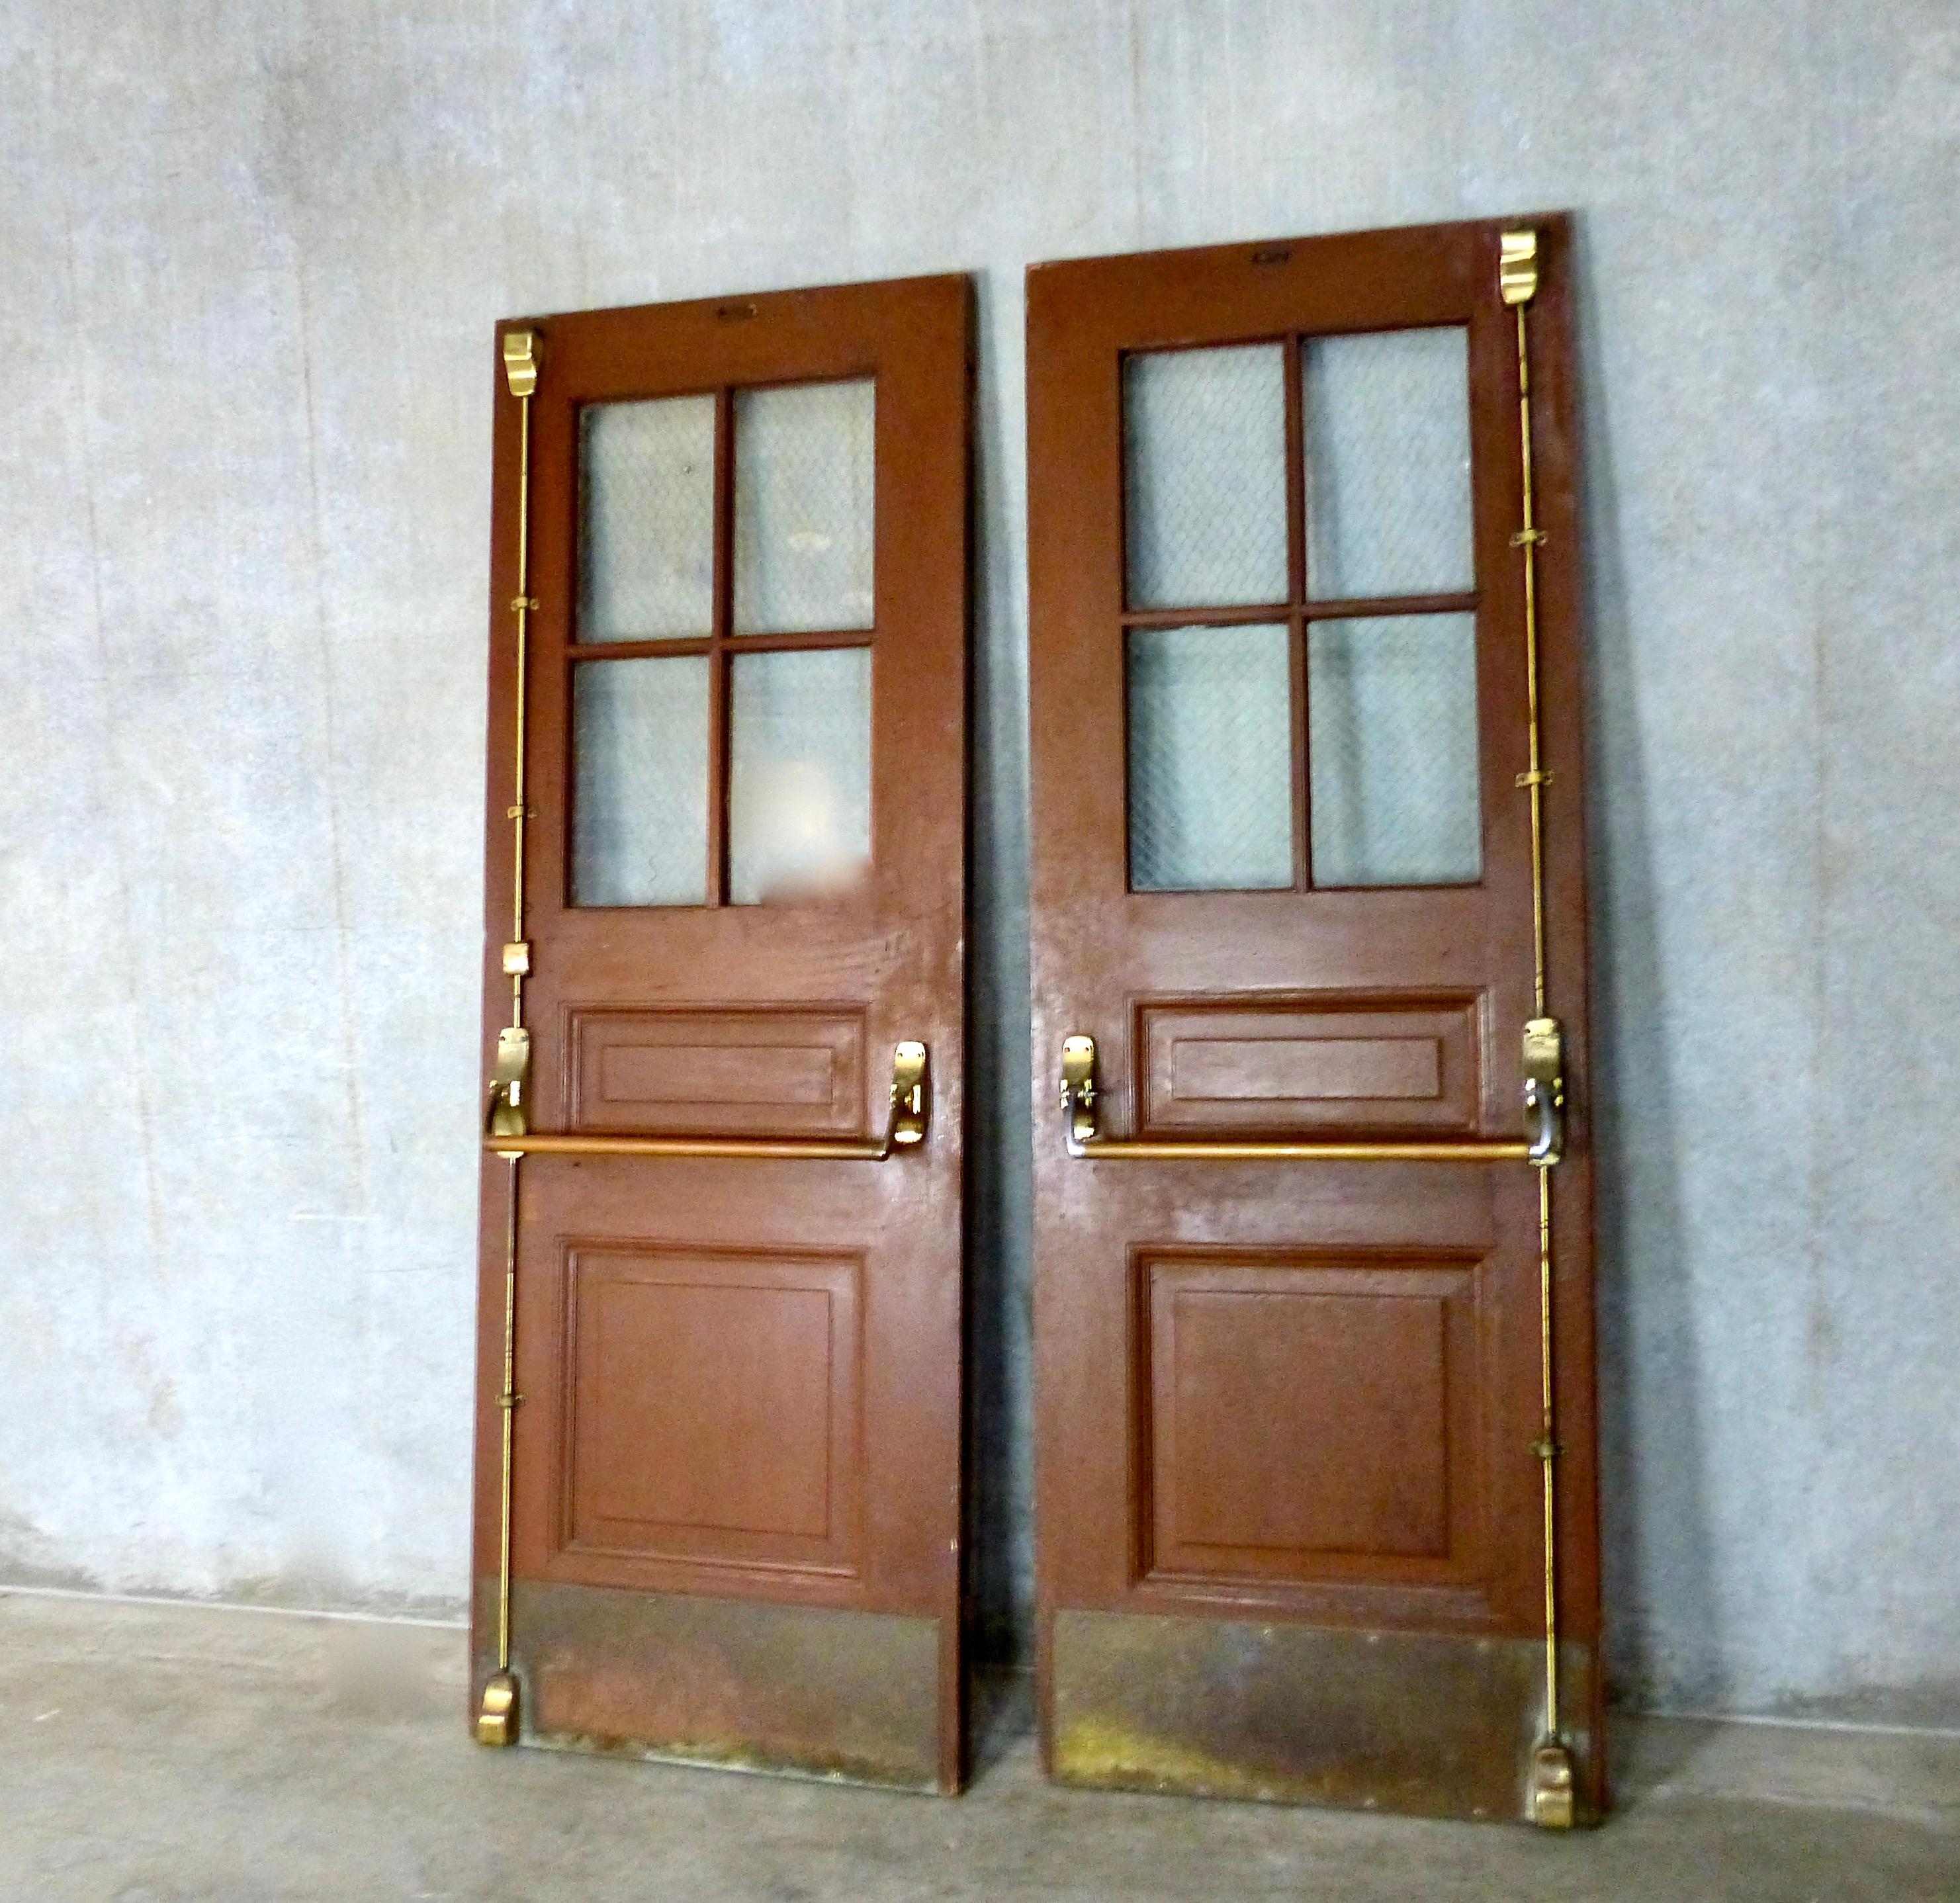 A circa 1920 matched pair of beautiful solid oak exterior doors — outfitted with commercial-style brass push bars and kick plates. Includes original brass hardware (doors handles, hinges, etc.) as well as authentic chicken wire glass in each of the